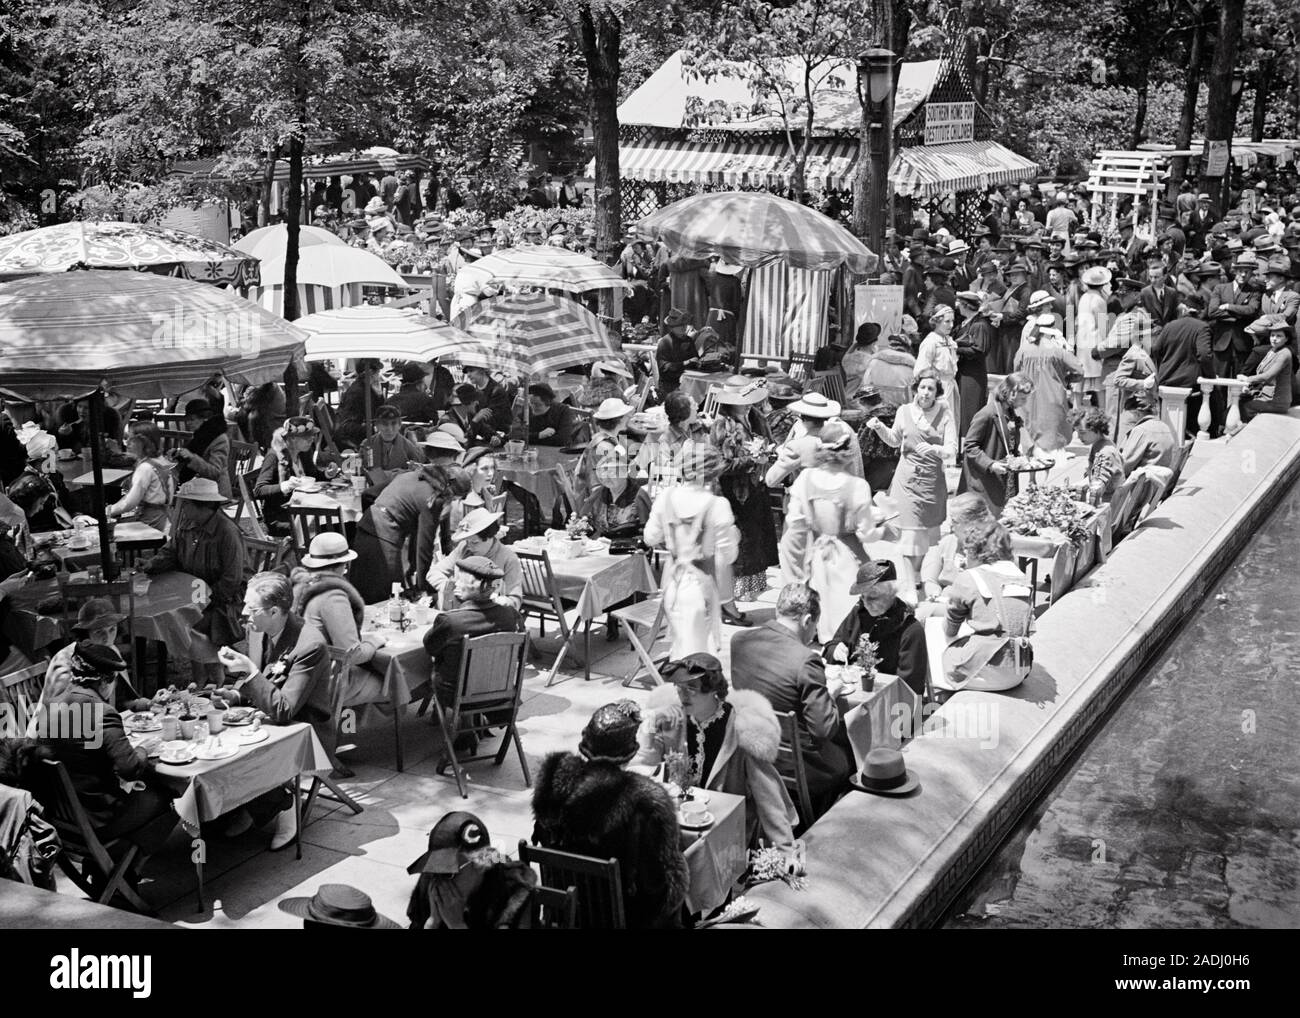 1930s CROWDED TABLES OF STYLISH MEN AND WOMEN EATING LUNCH ALFRESCO DURING RITTENHOUSE SQUARE FLOWER MARKET PHILADELPHIA PA USA - f7810 HAR001 HARS FRIENDSHIP LADIES PERSONS MALES SENIOR ADULT B&W PARTNER TABLES HAPPINESS HIGH ANGLE LEISURE AND EXTERIOR LEADERSHIP PA POWERFUL RECREATION PRIDE OF AUTHORITY RITTENHOUSE SQUARE CONCEPTUAL STYLISH UPPER CRUST MID-ADULT SPRINGTIME WELL-TO-DO WIVES BLACK AND WHITE CAUCASIAN ETHNICITY DURING HAR001 OLD FASHIONED Stock Photo